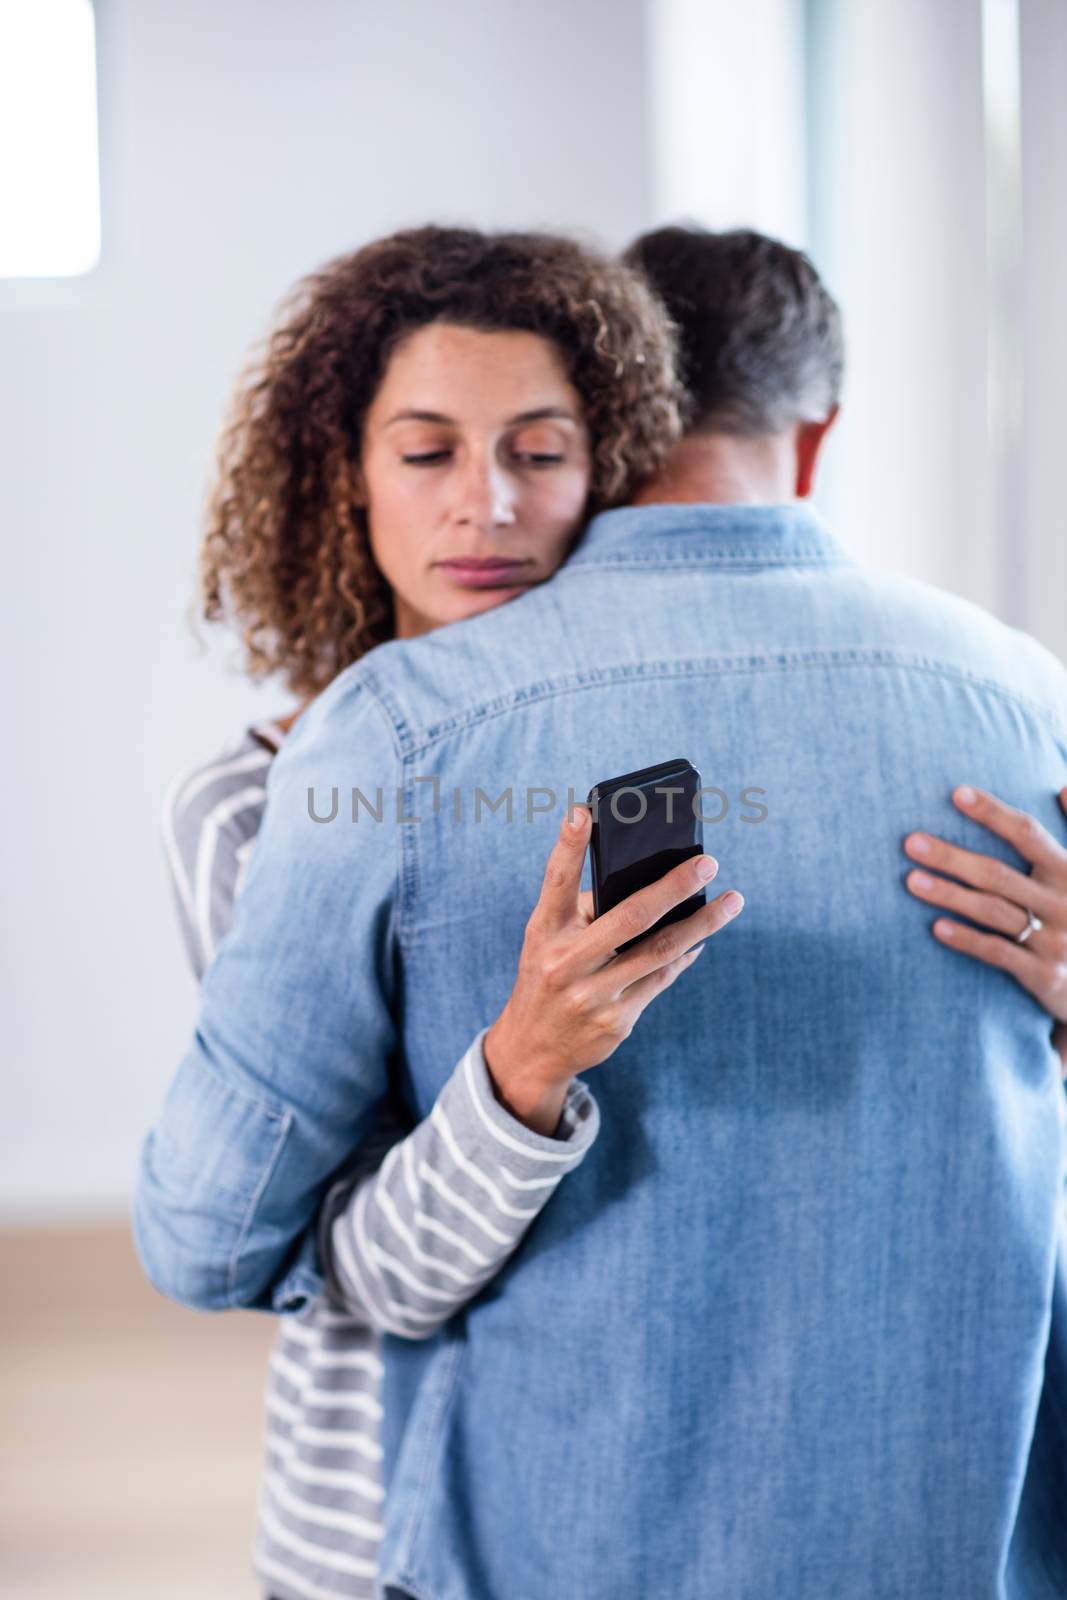 Woman checking her mobile phone while embracing a man by Wavebreakmedia